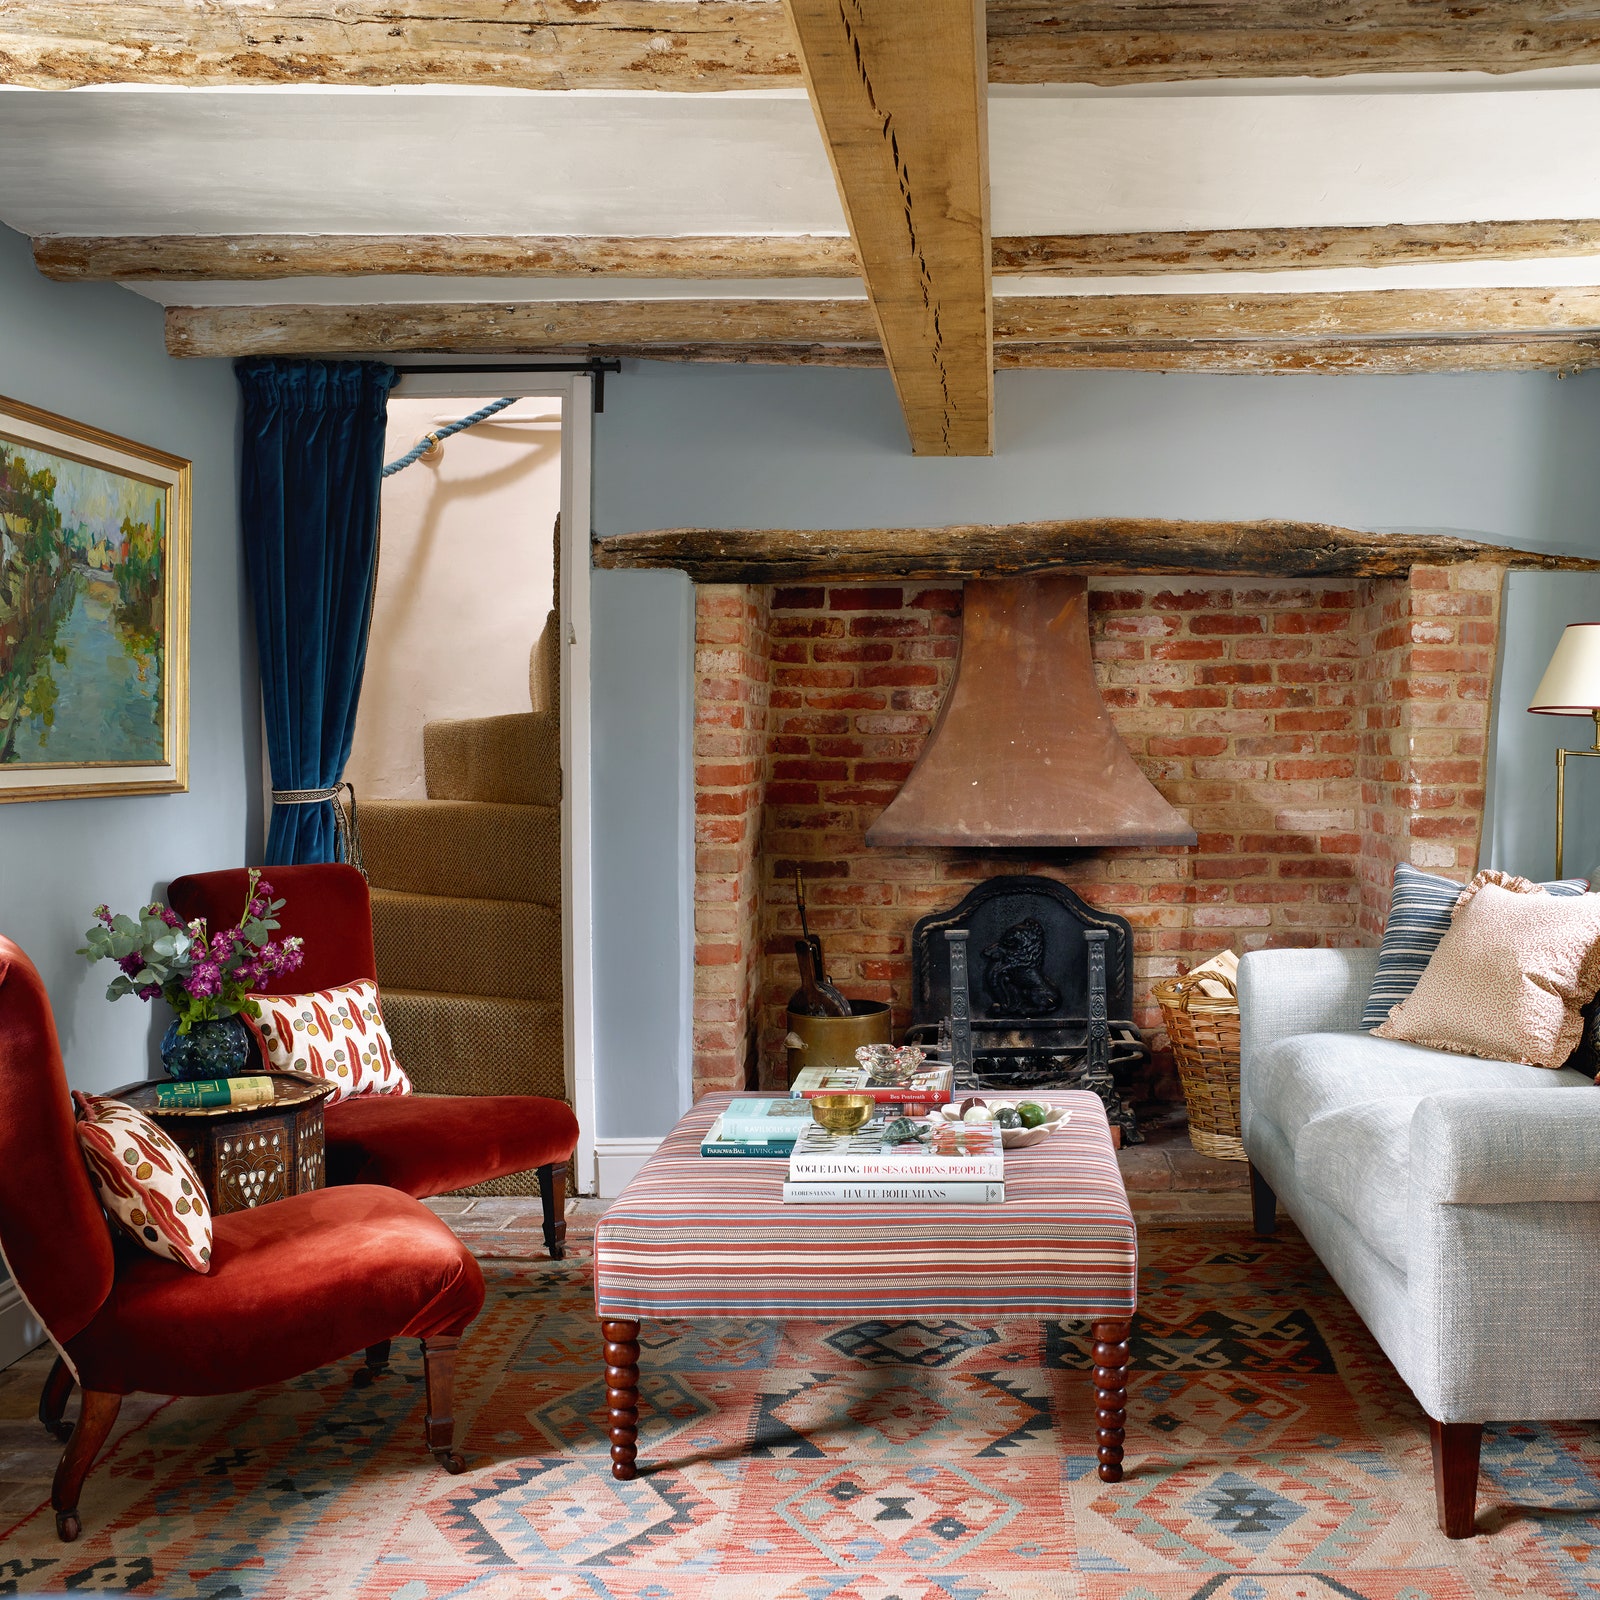 Two 18th-century Norfolk cottages melded into one harmonious holiday house